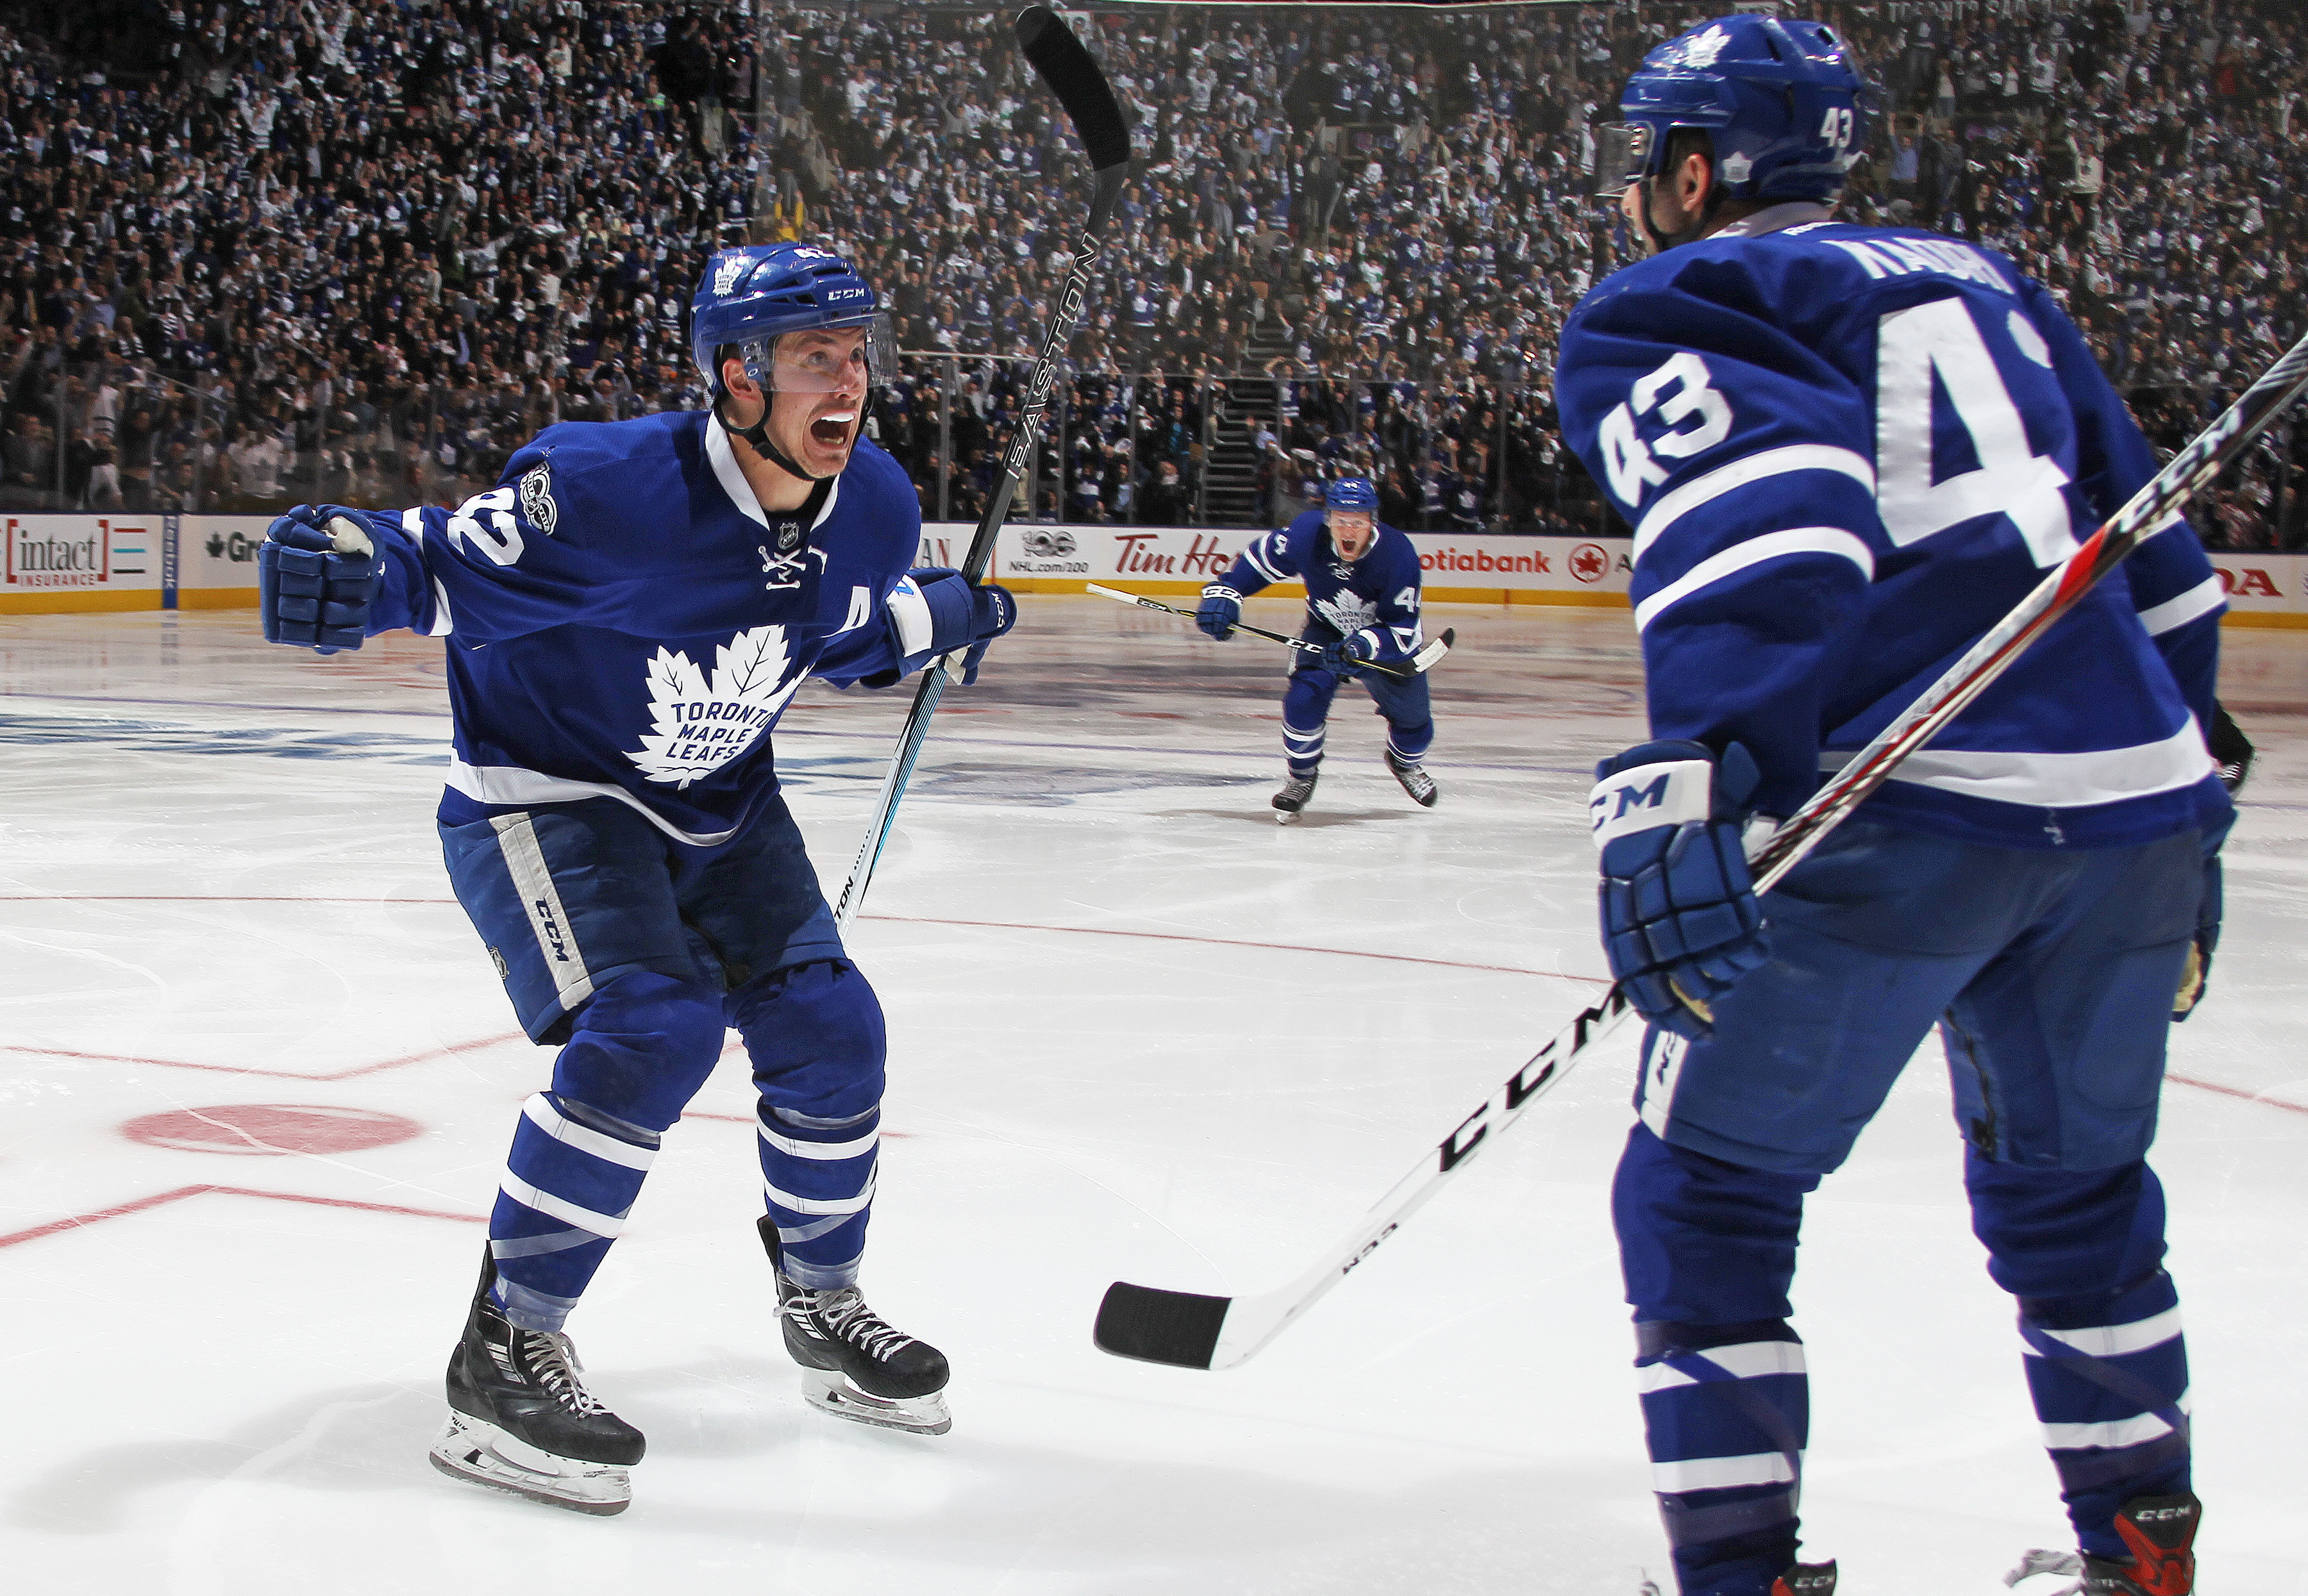 TORONTO, ON - APRIL 17: Tyler Bozak #42 of the Toronto Maple Leafs celebrates his game winning goal in the 1st overtime against the Washington Capitals in Game Three of the Eastern Conference Quarterfinals during the 2017 NHL Stanley Cup Playoffs at the Air Canada Centre on April 17, 2017 in Toronto, Ontario, Canada. The Maple Leafs defeated the Capitals 4-3 in overtime and take a 2-1 series lead.(Photo by Claus Andersen/Getty Images)